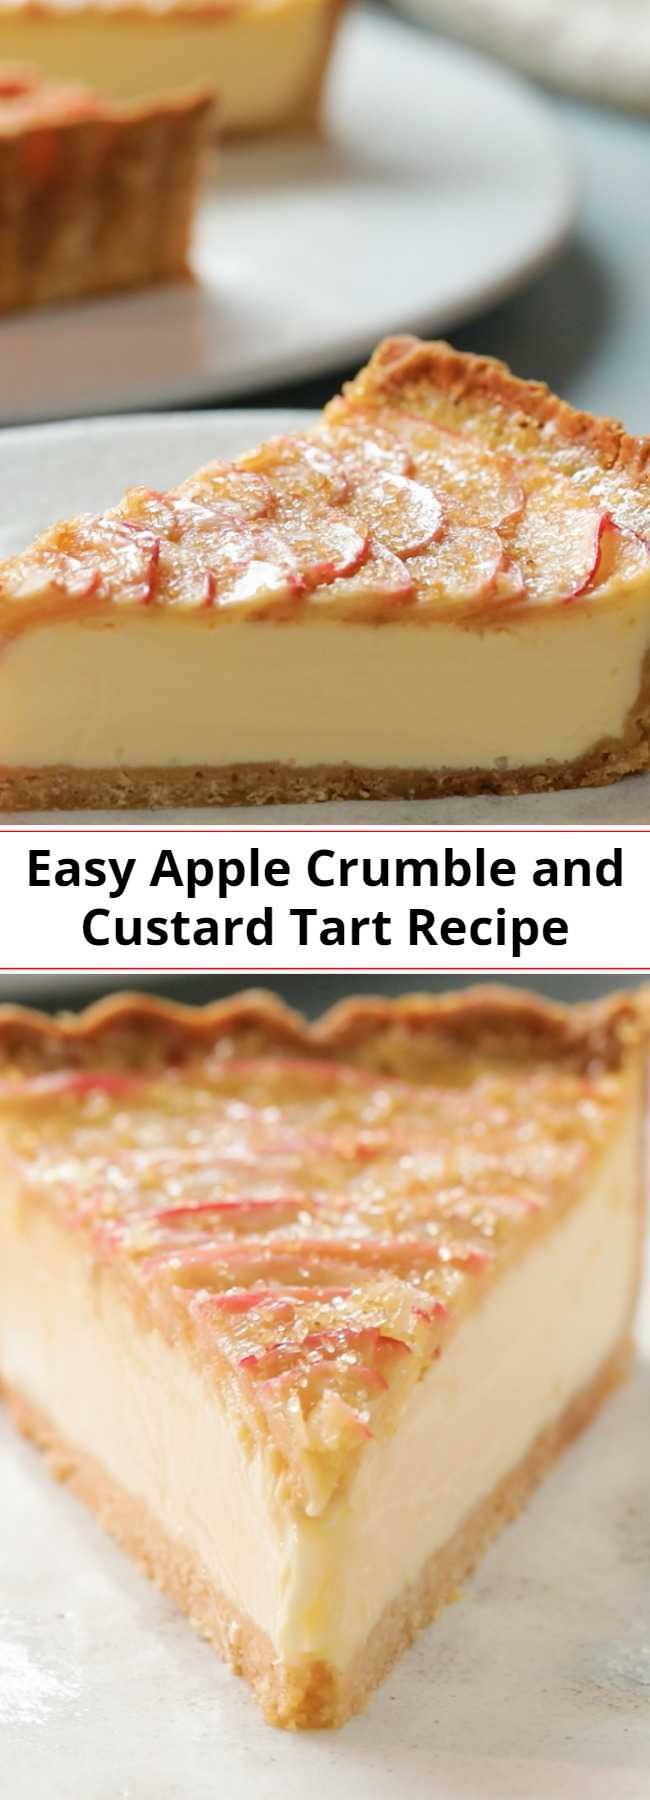 Easy Apple Crumble and Custard Tart Recipe - Ever wondered what an apple crumble tart would taste like with a custard filling? This easy recipe will become your best go-to dessert for any occasion, summer and fall alike.